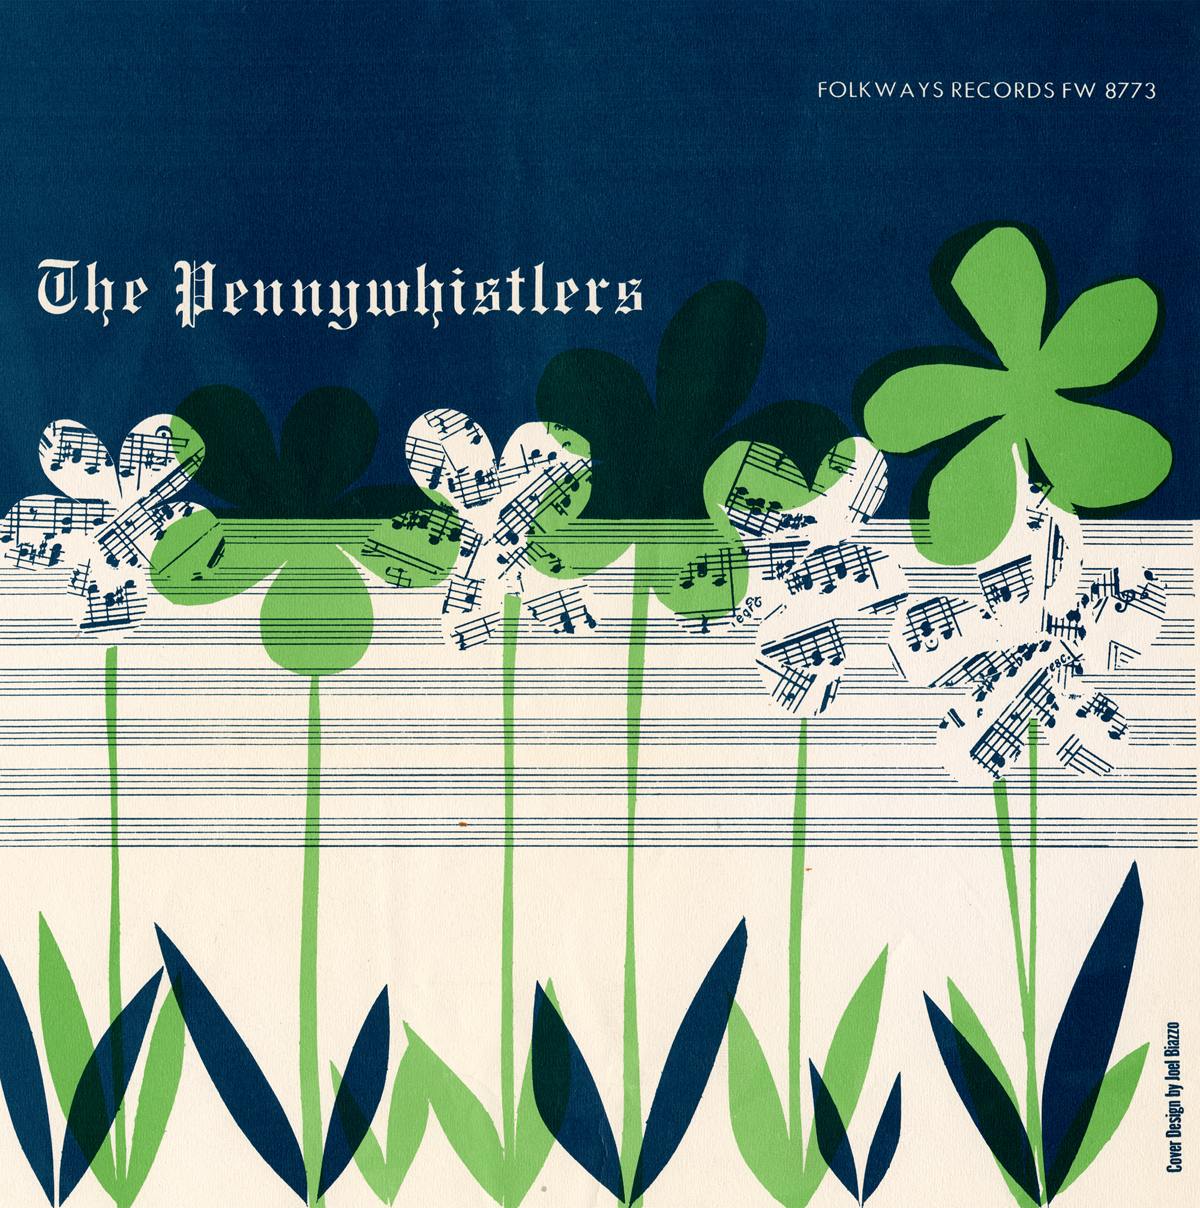 THE PENNYWHISTLERS